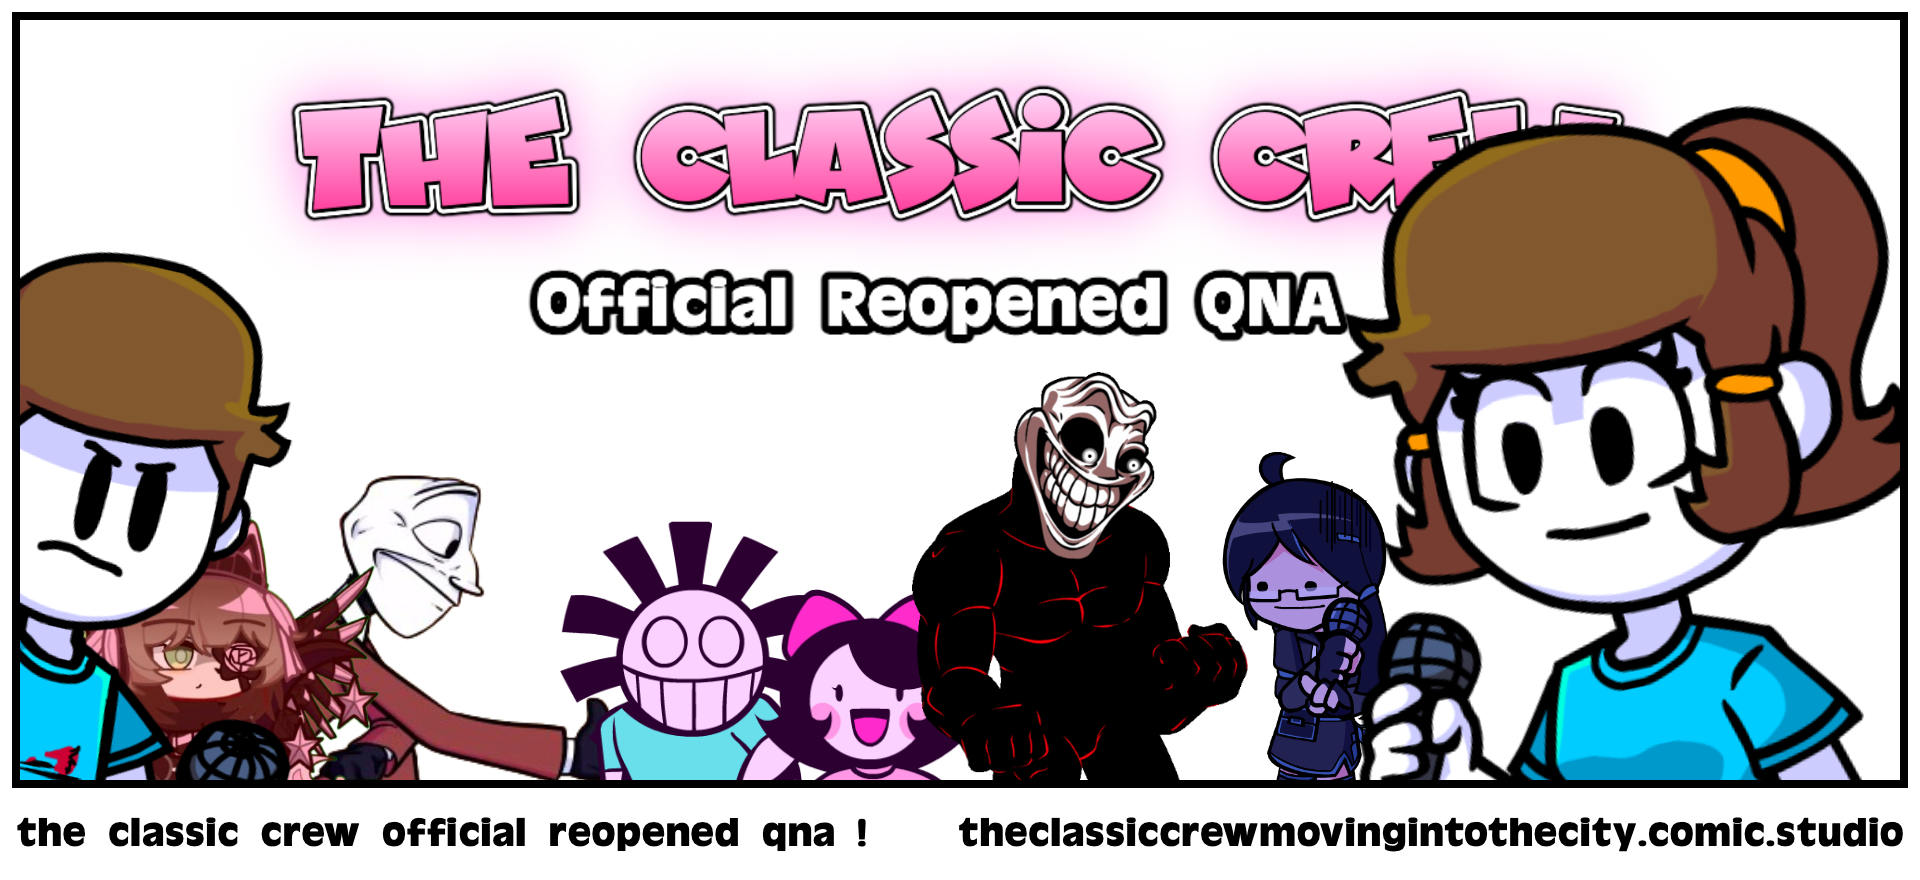 the classic crew official reopened qna !